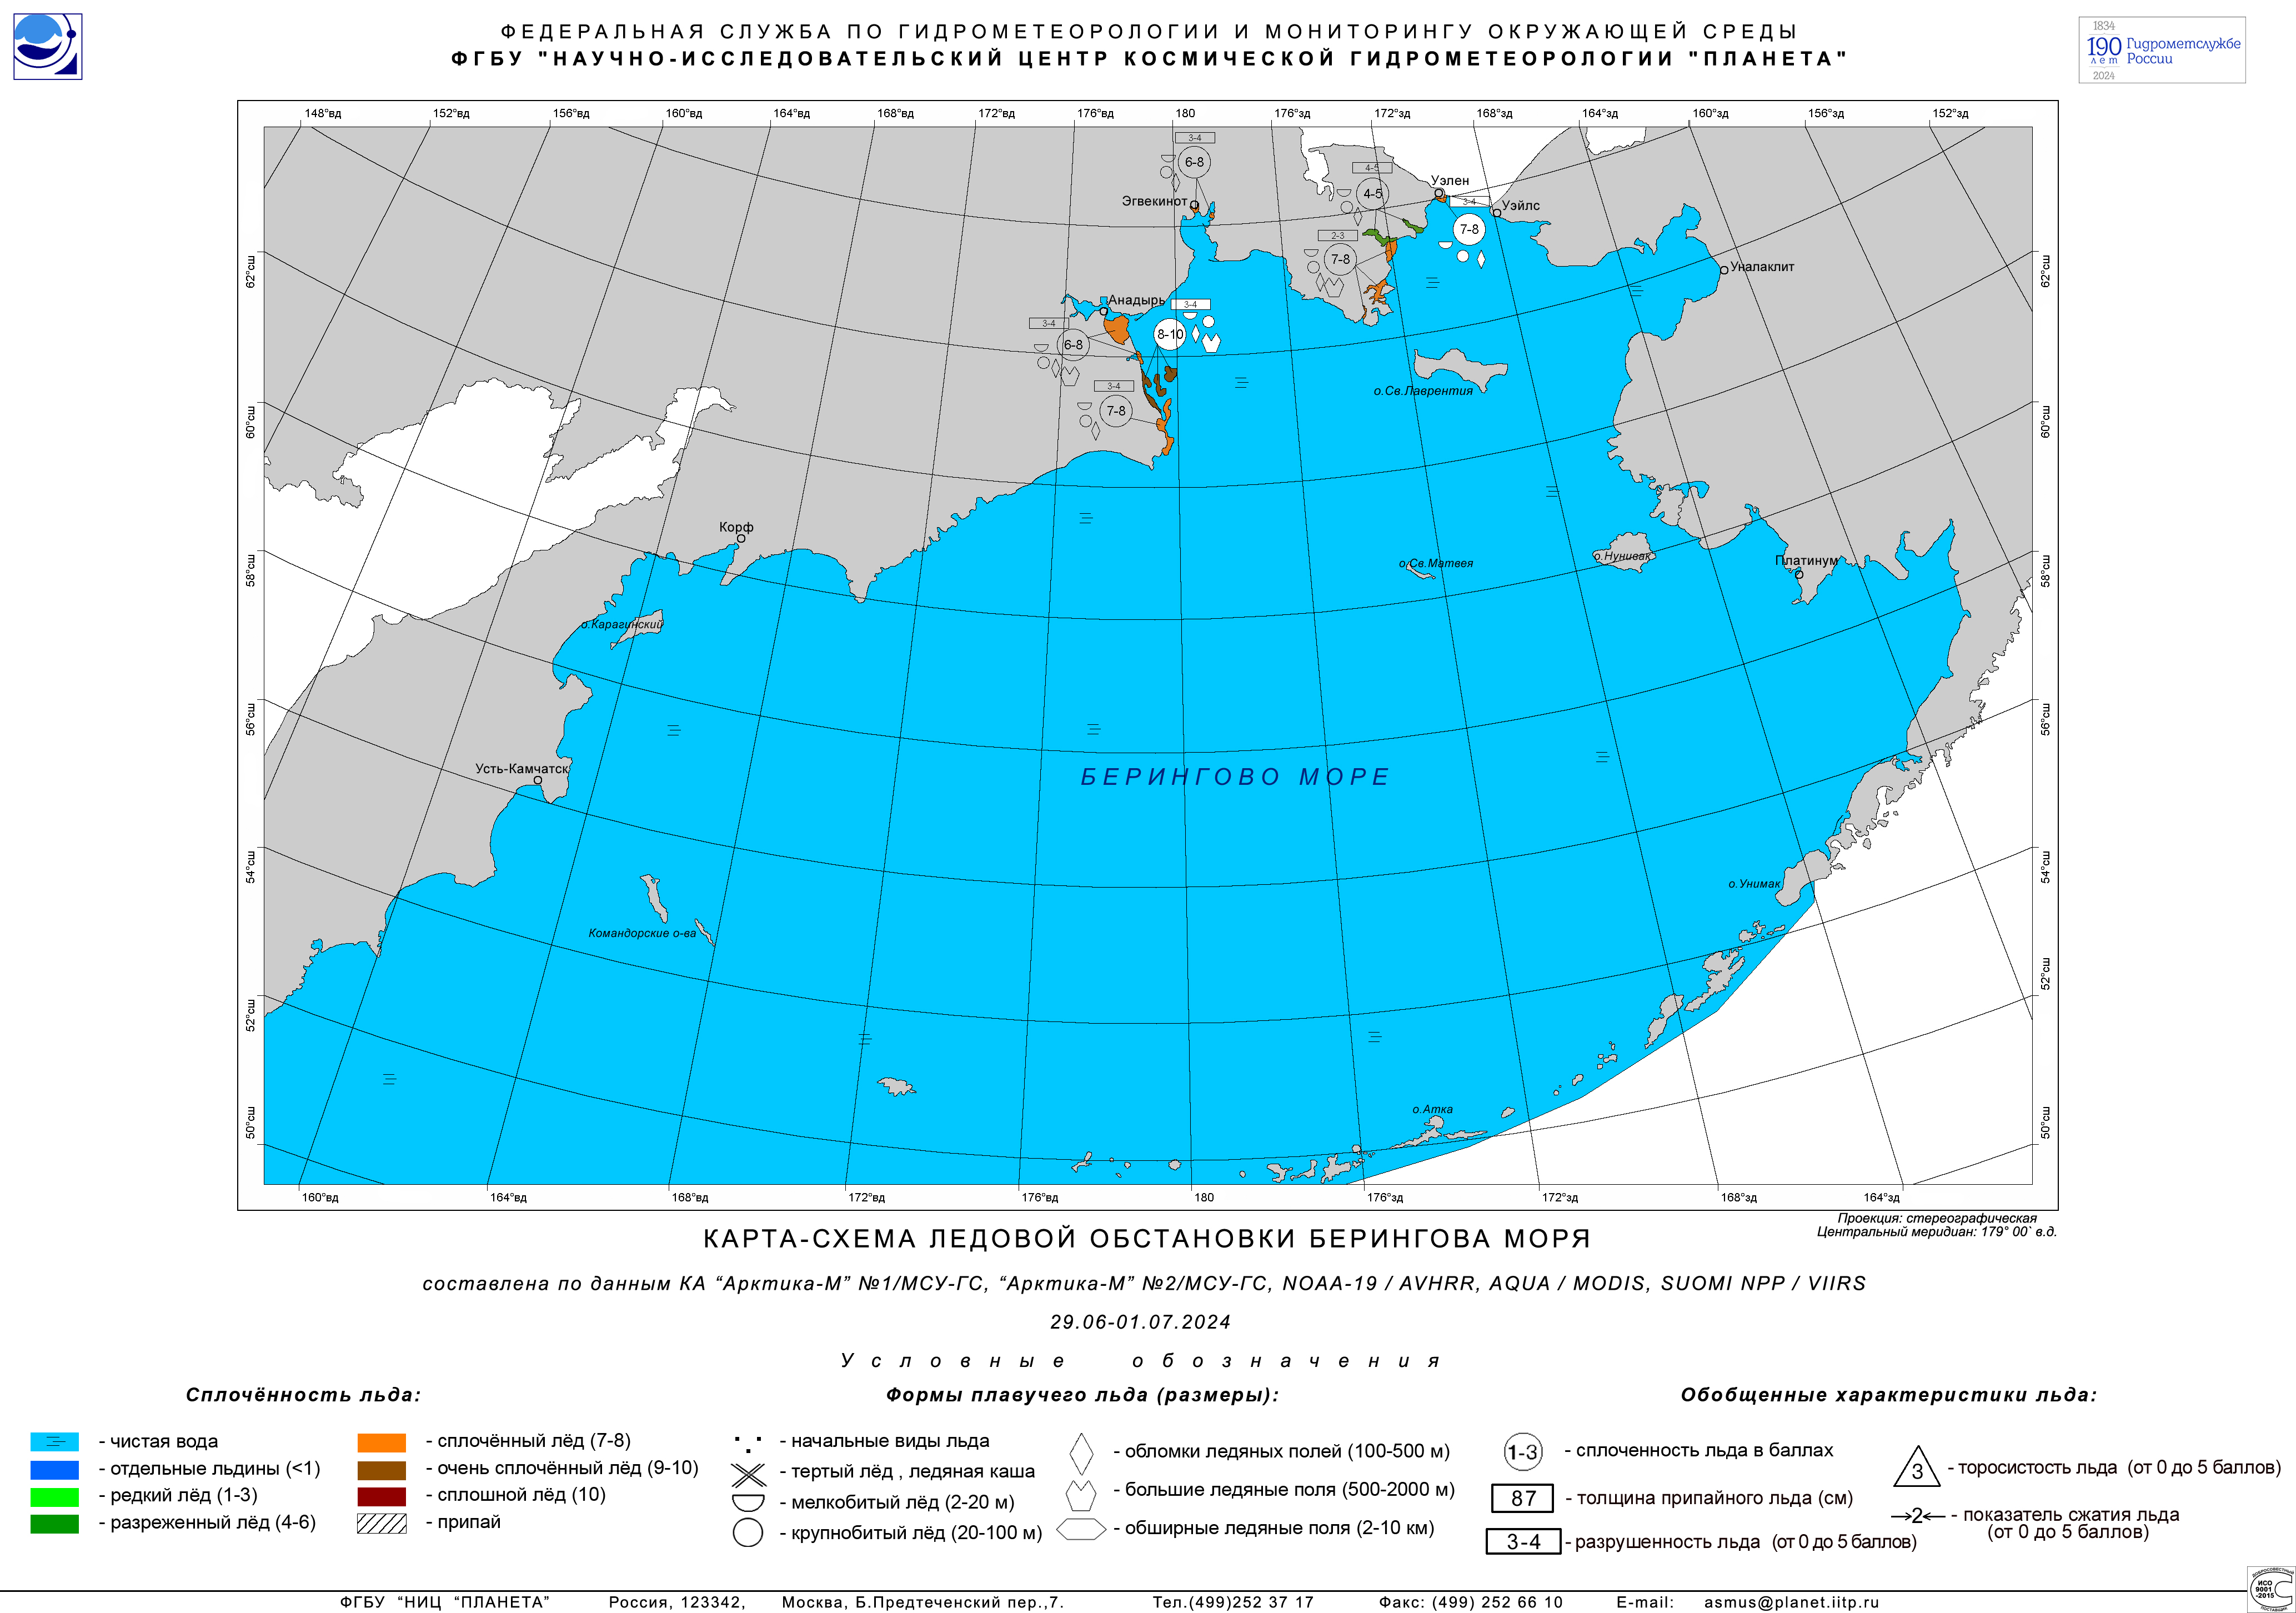 Ice map for the Bering Sea